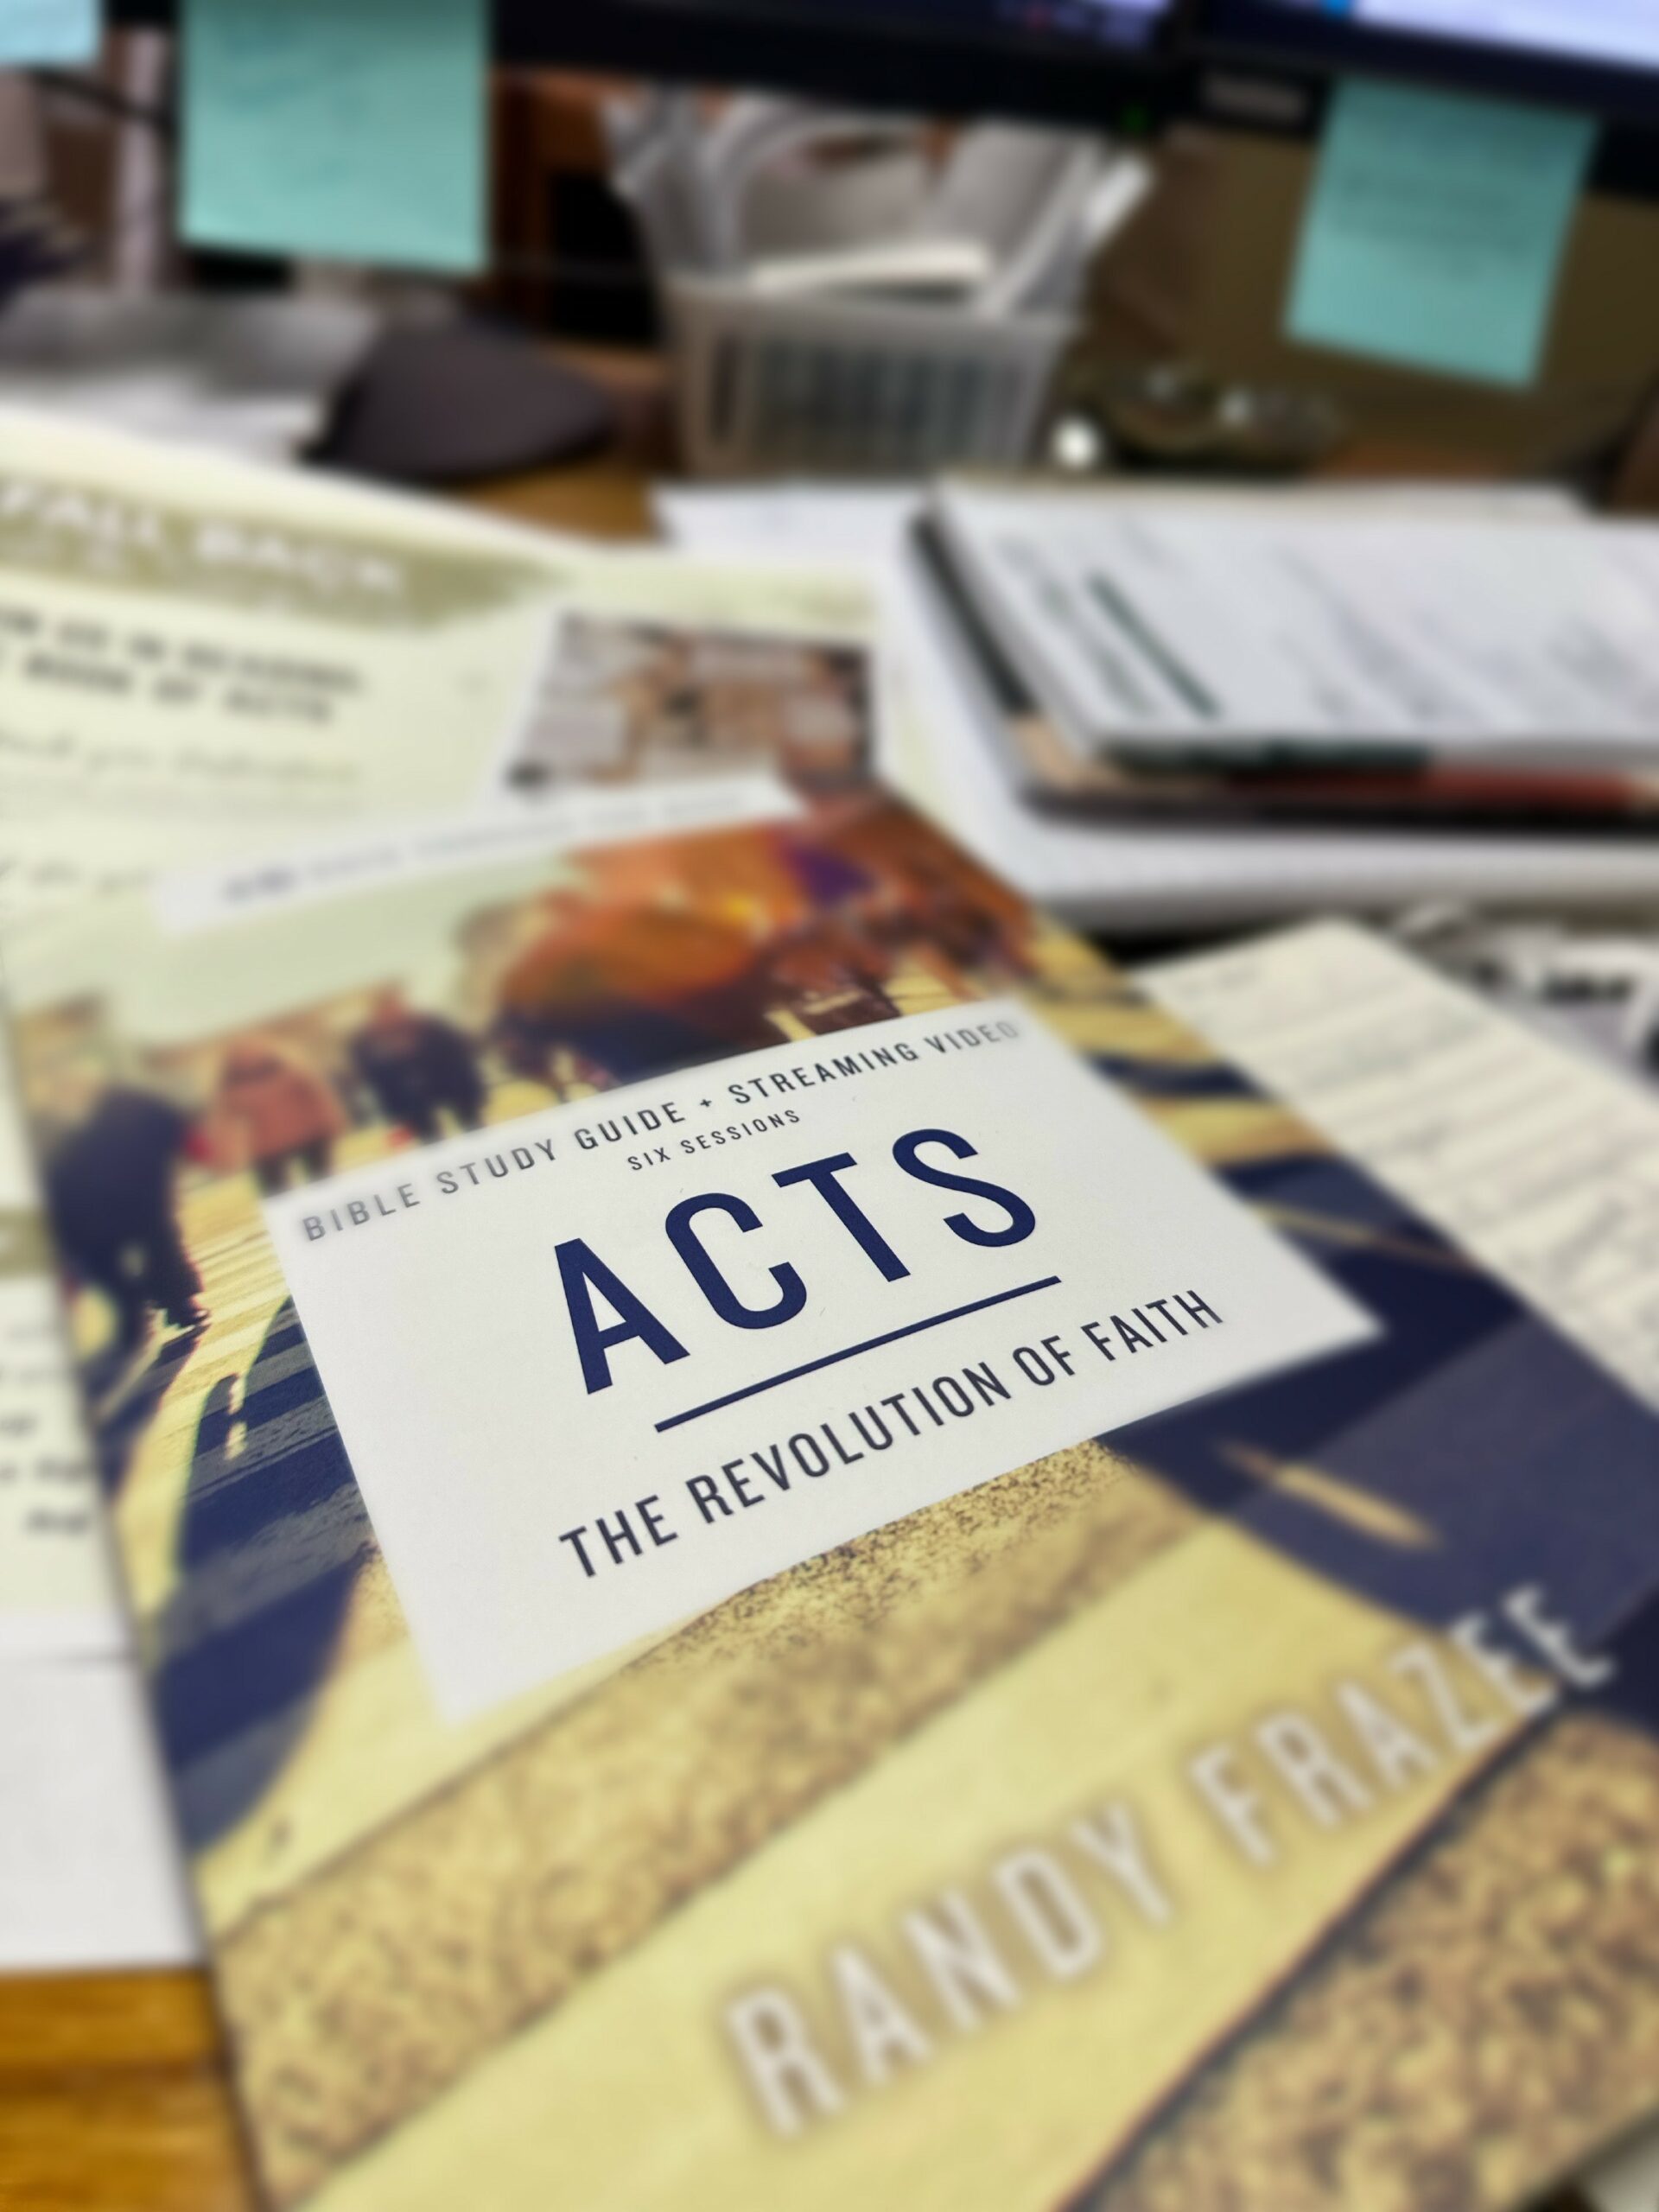 Bible Study – The Book of Acts